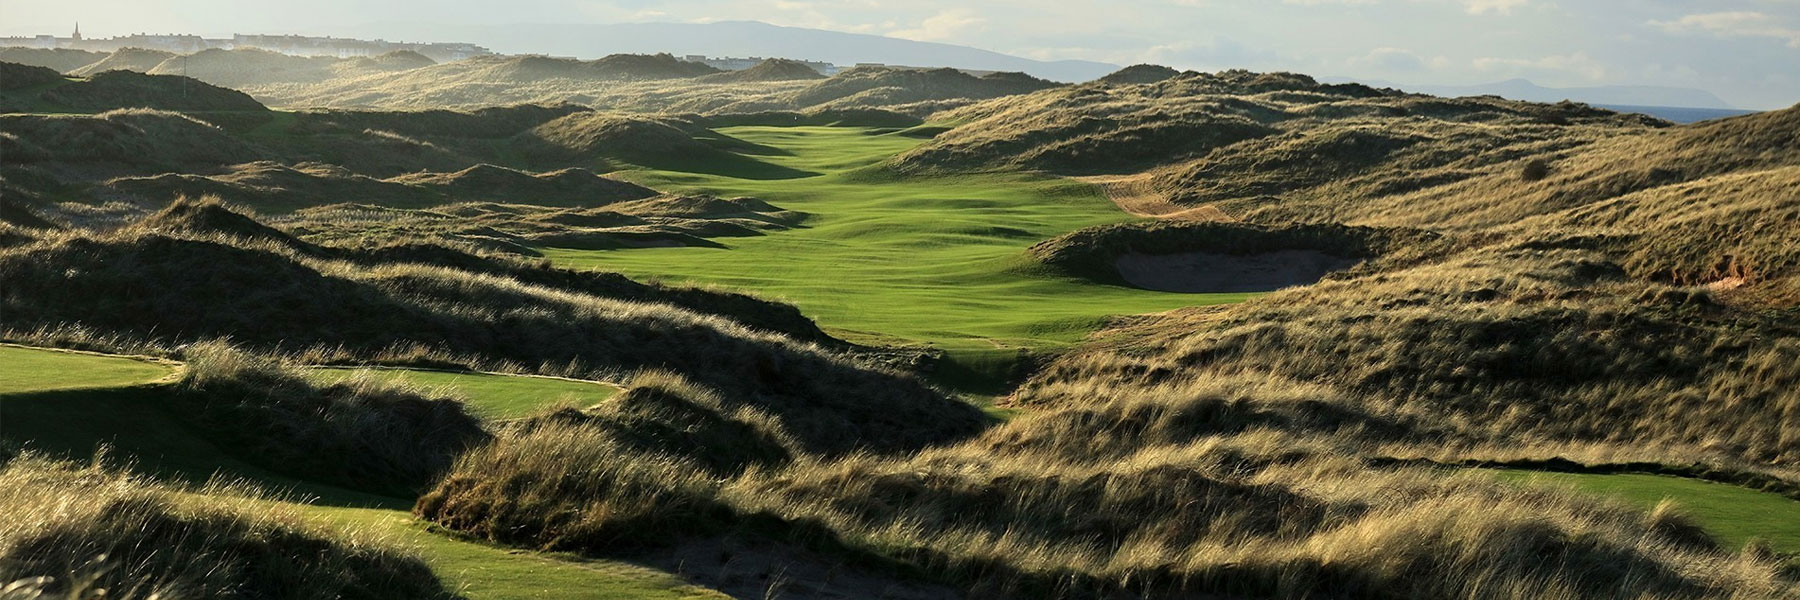 Ireland Golf Vacation Packages